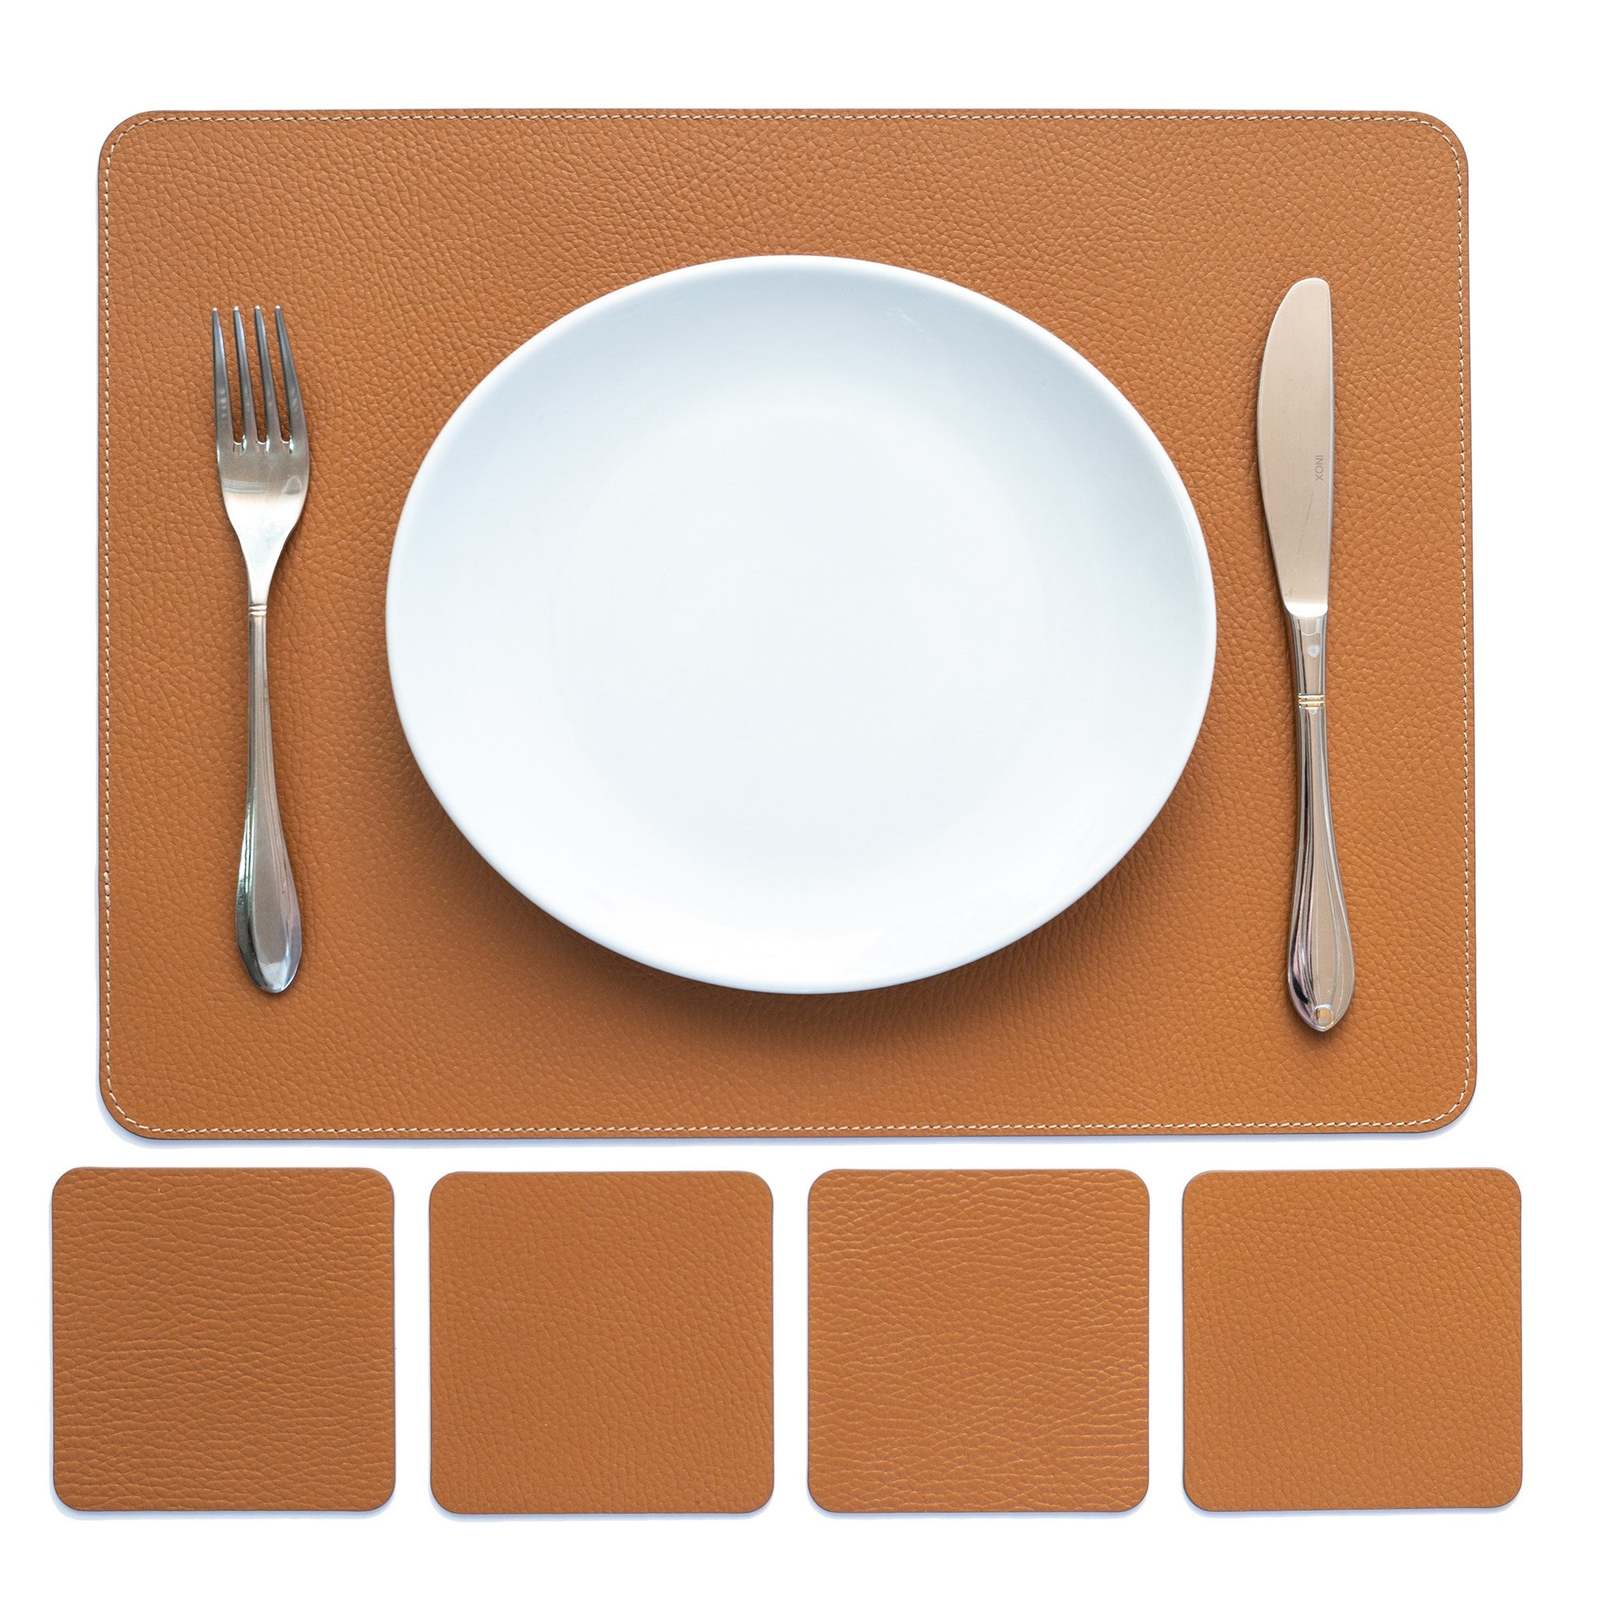 Primary image for Table Placemats and coasters in Recycled Leather, Dining table sets - Cognac